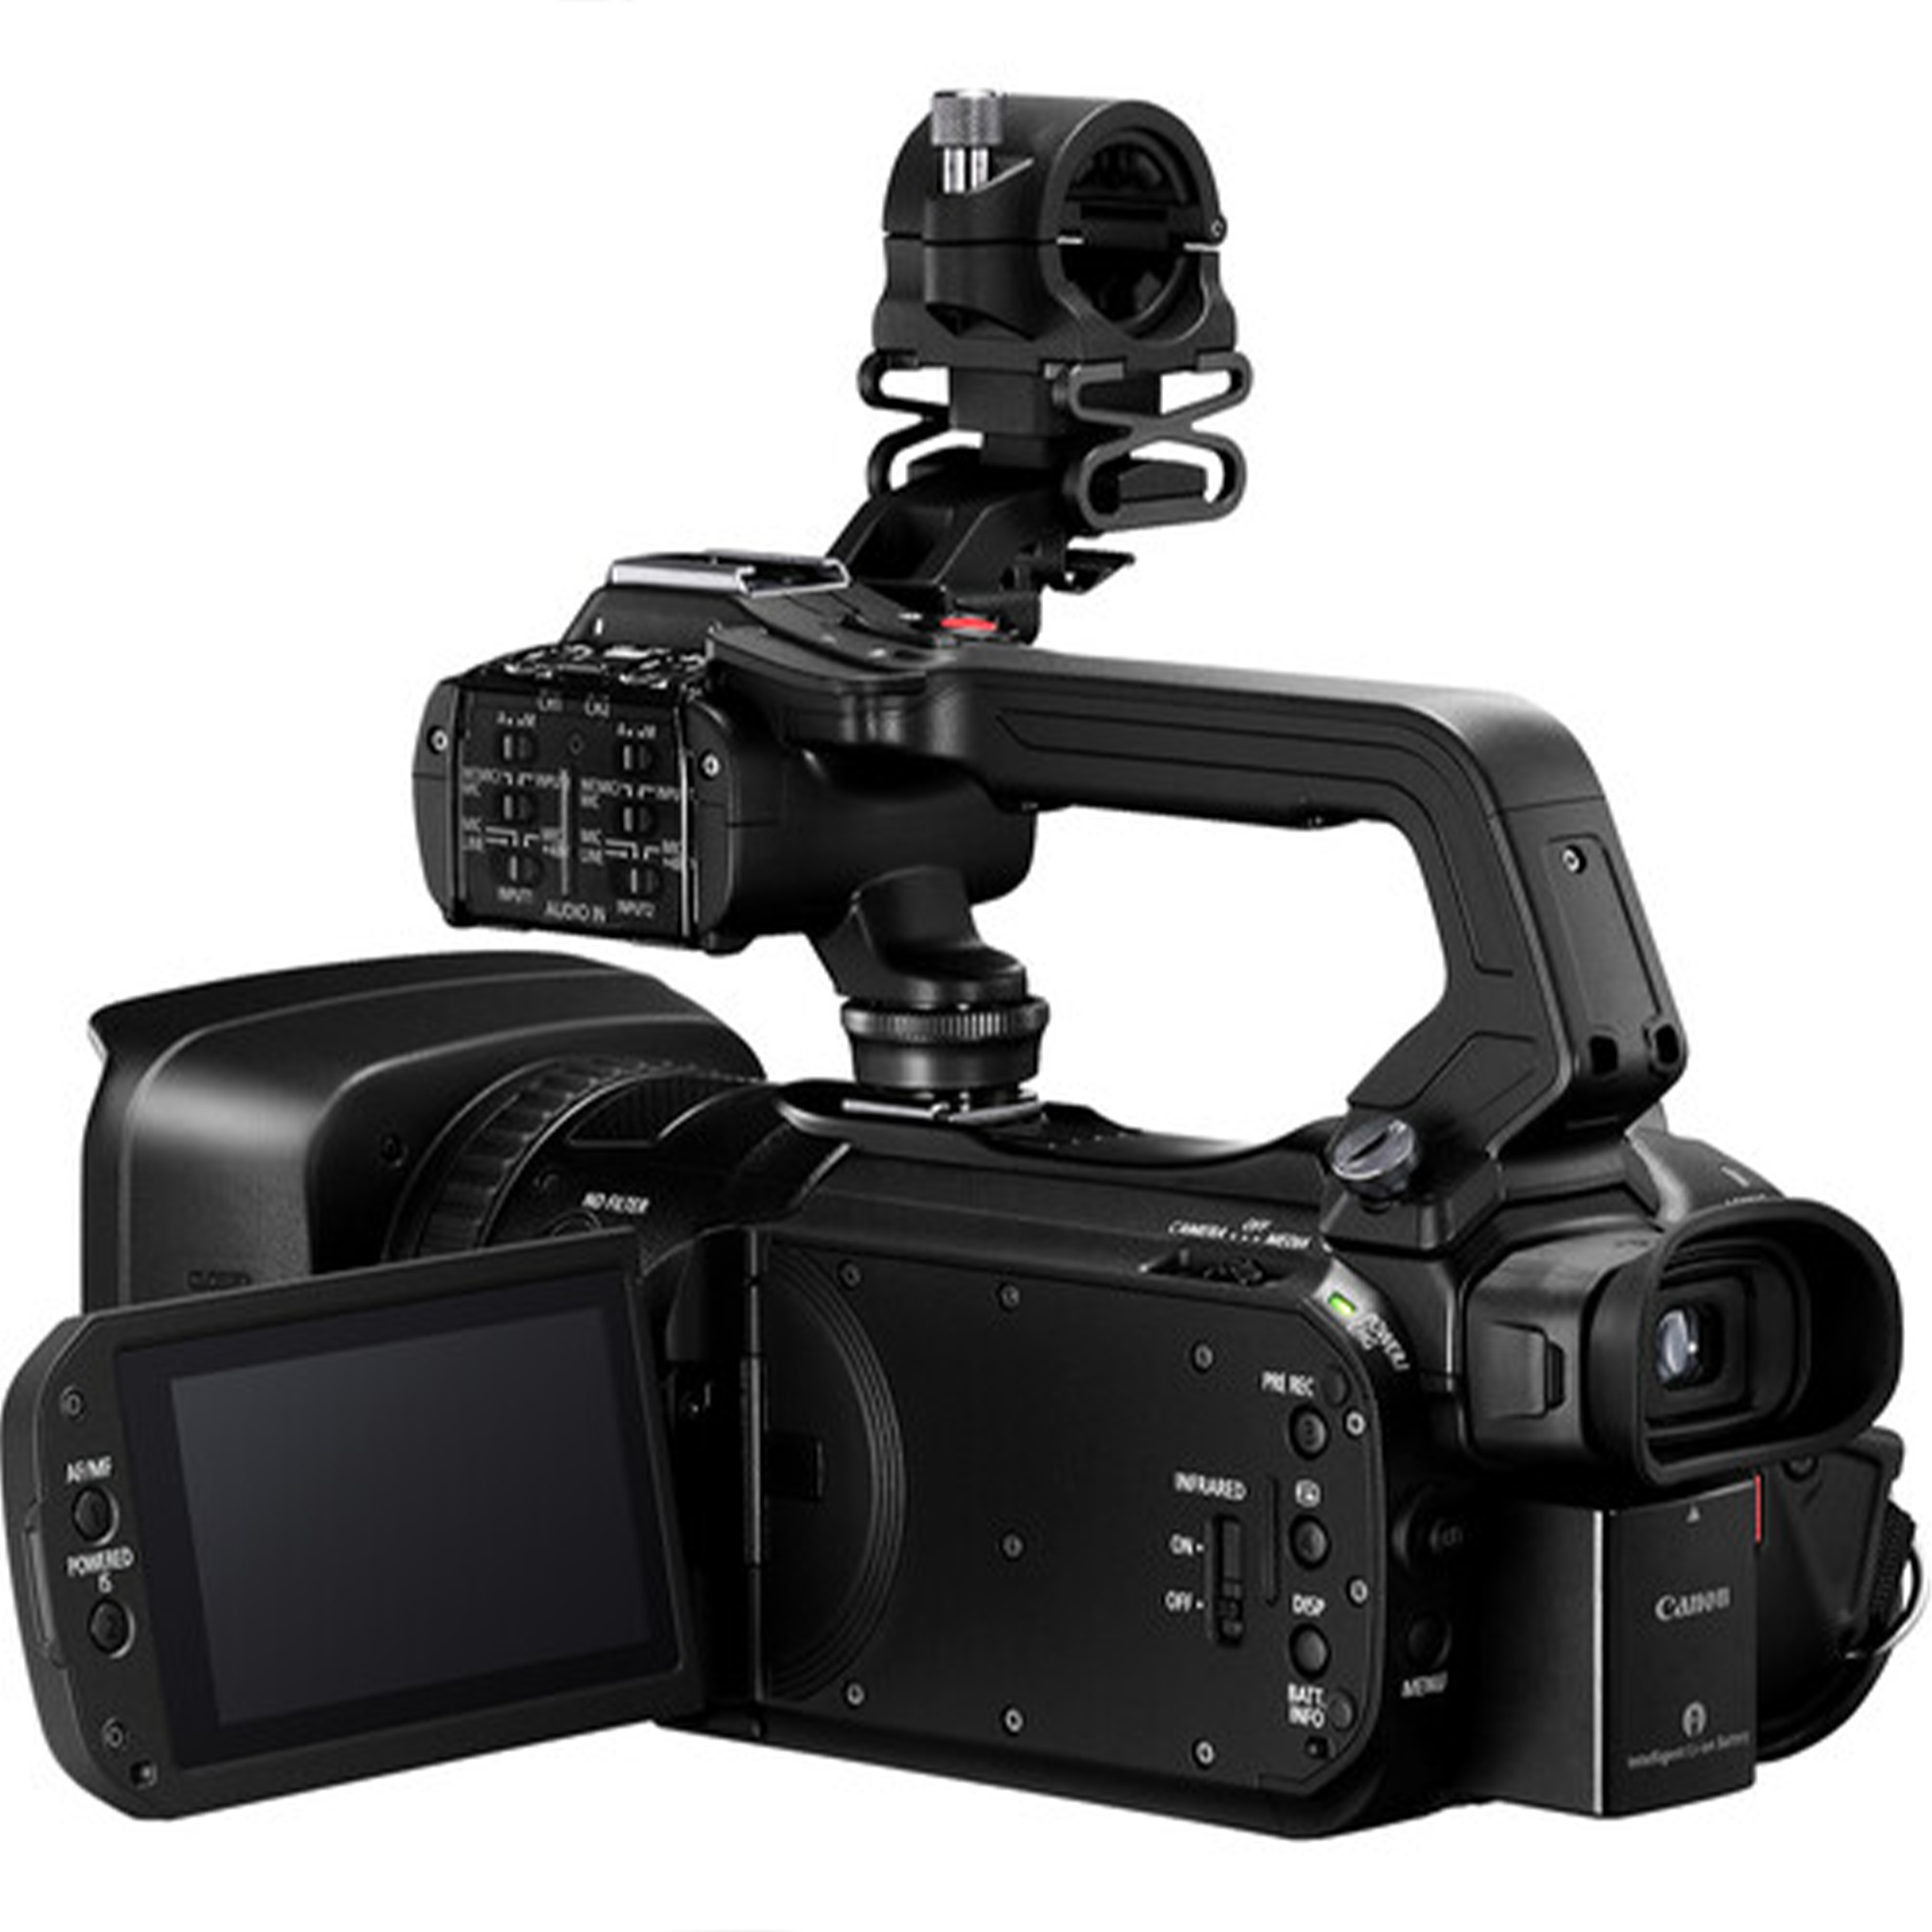 The powerful, professional camcorder.